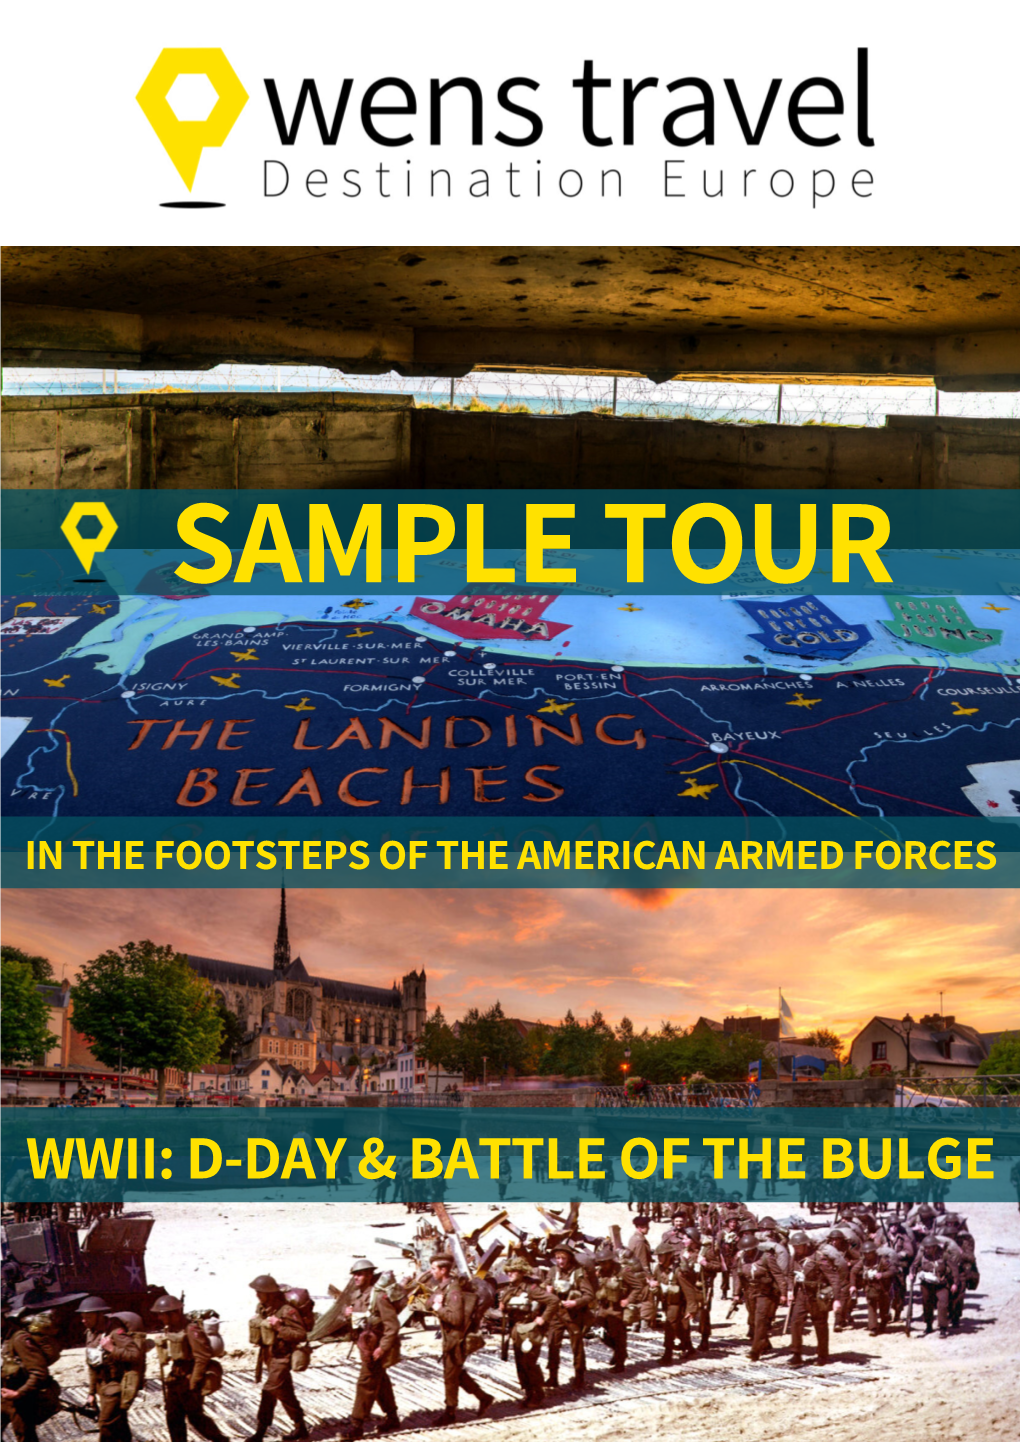 In the Footsteps of the American Armed Forces